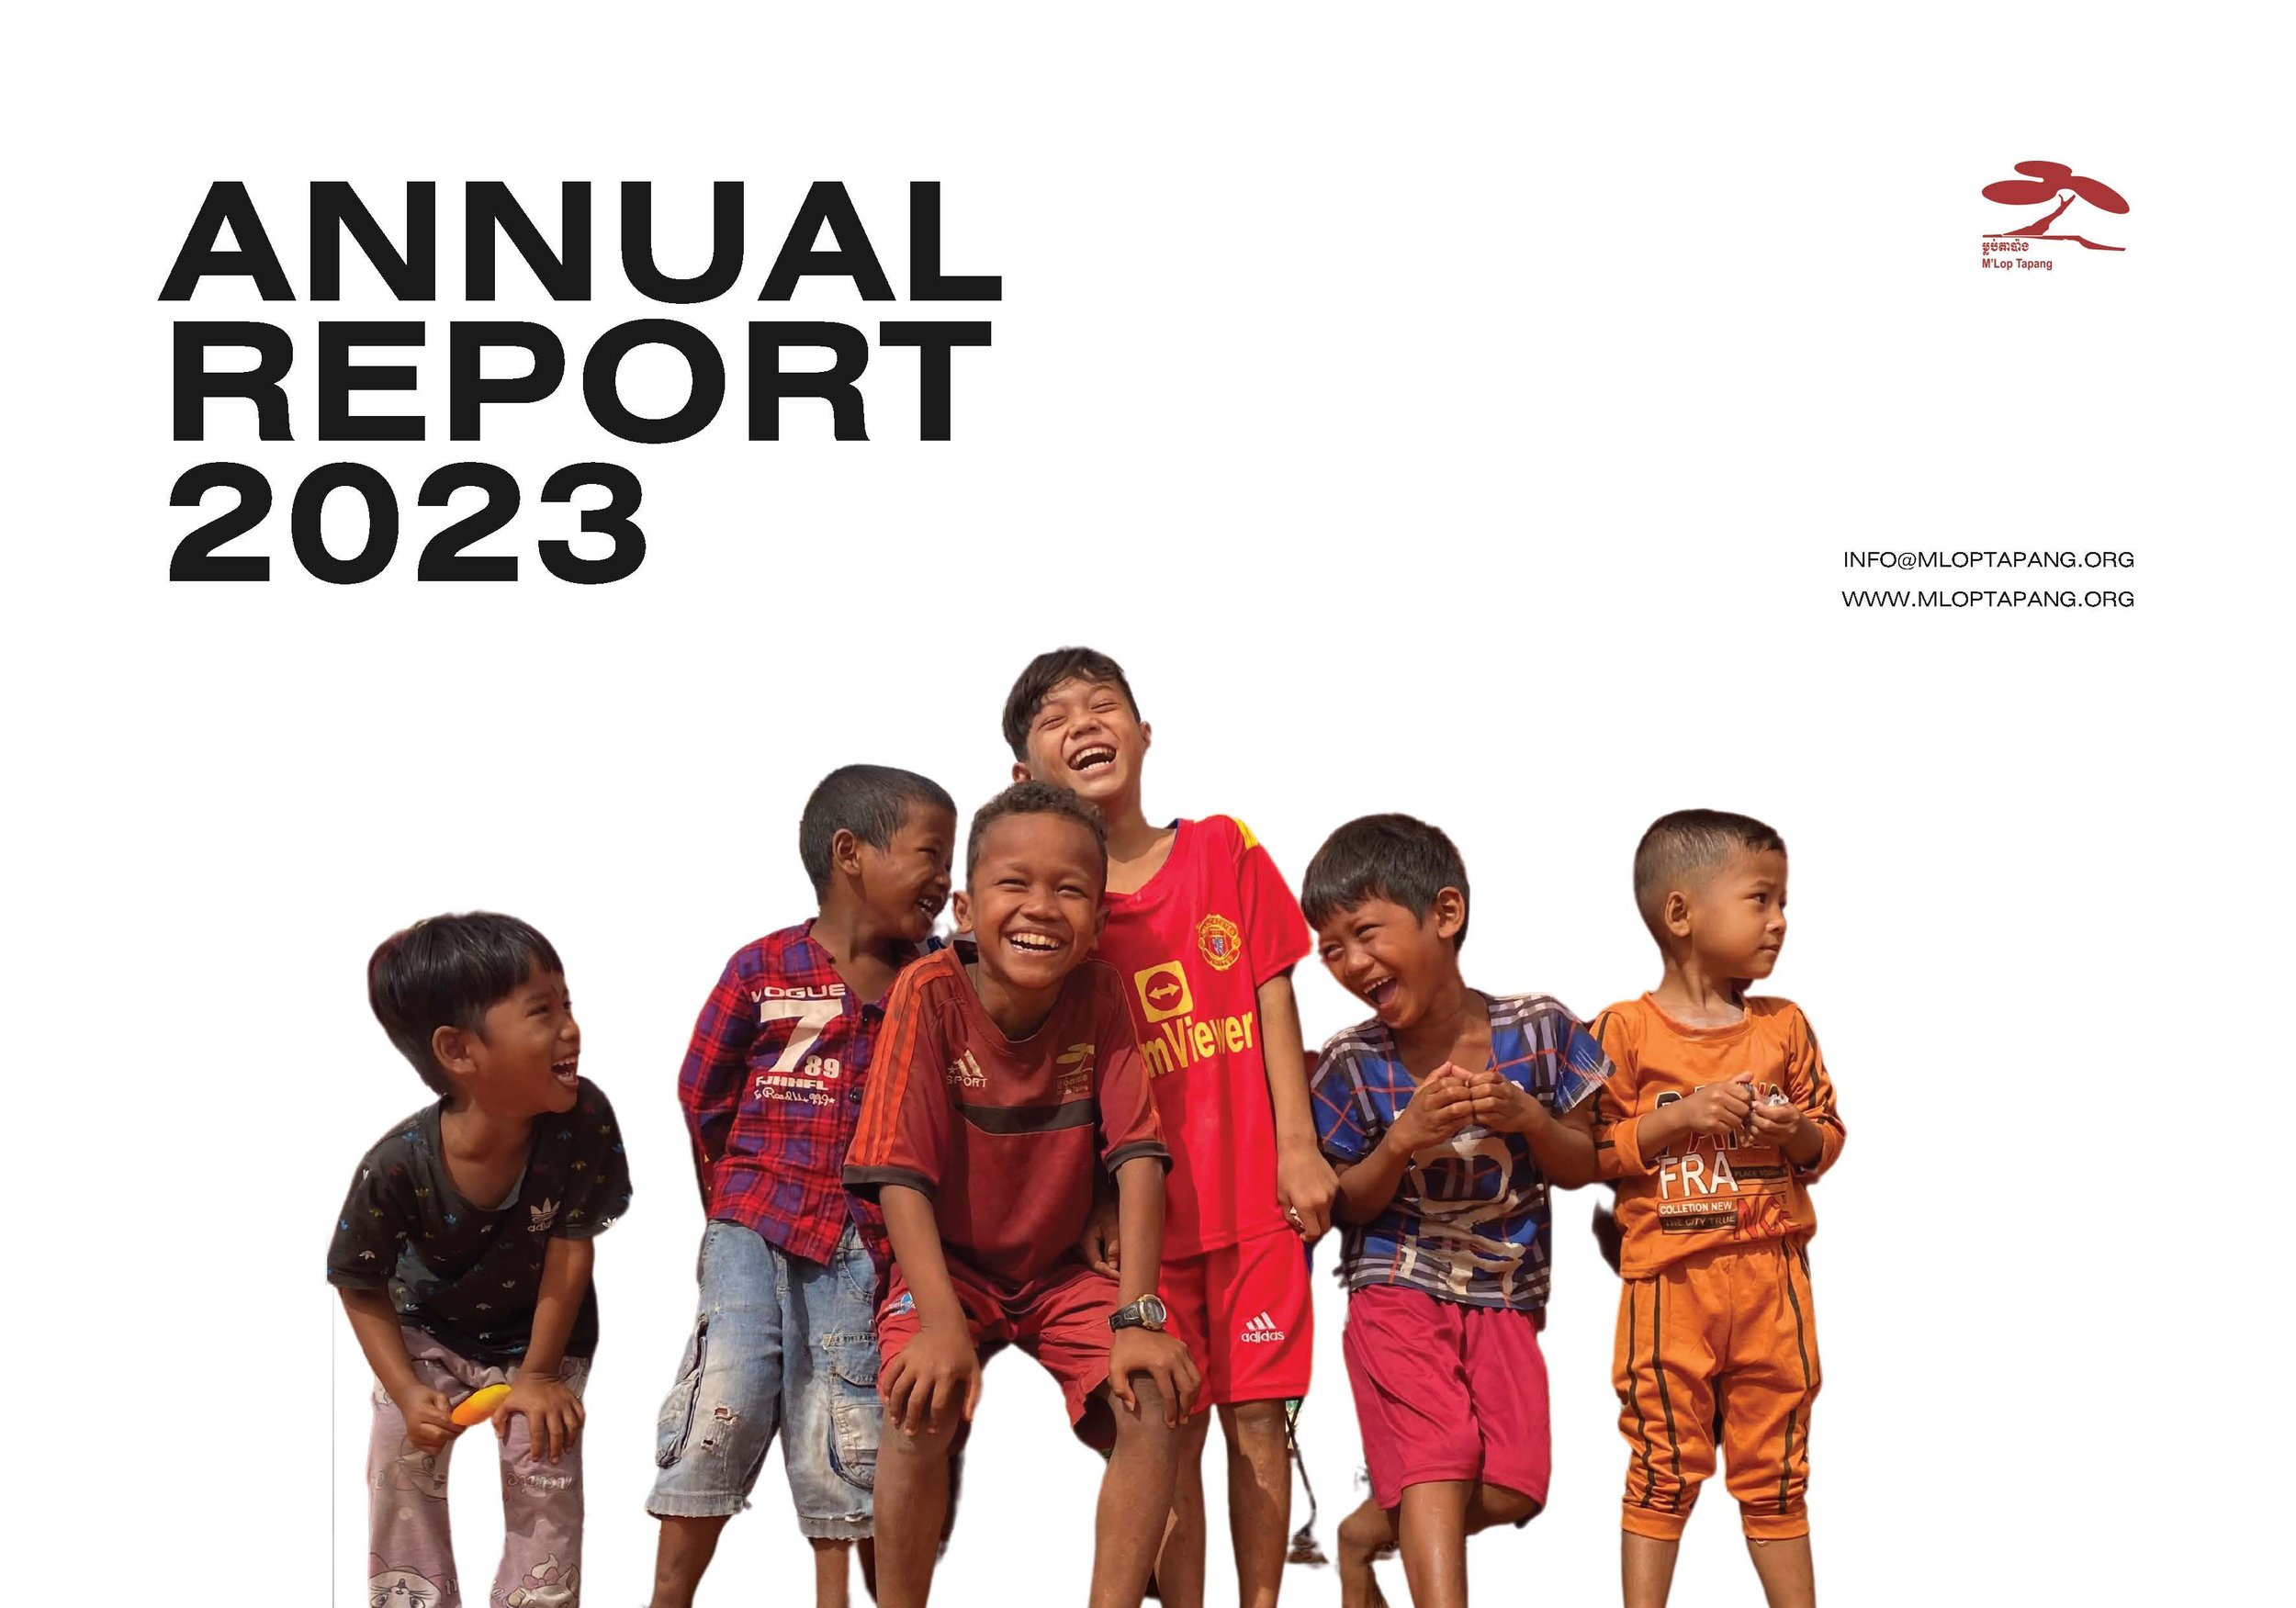 M'Lop Tapang 2023 Annual Report_Page_01.jpg